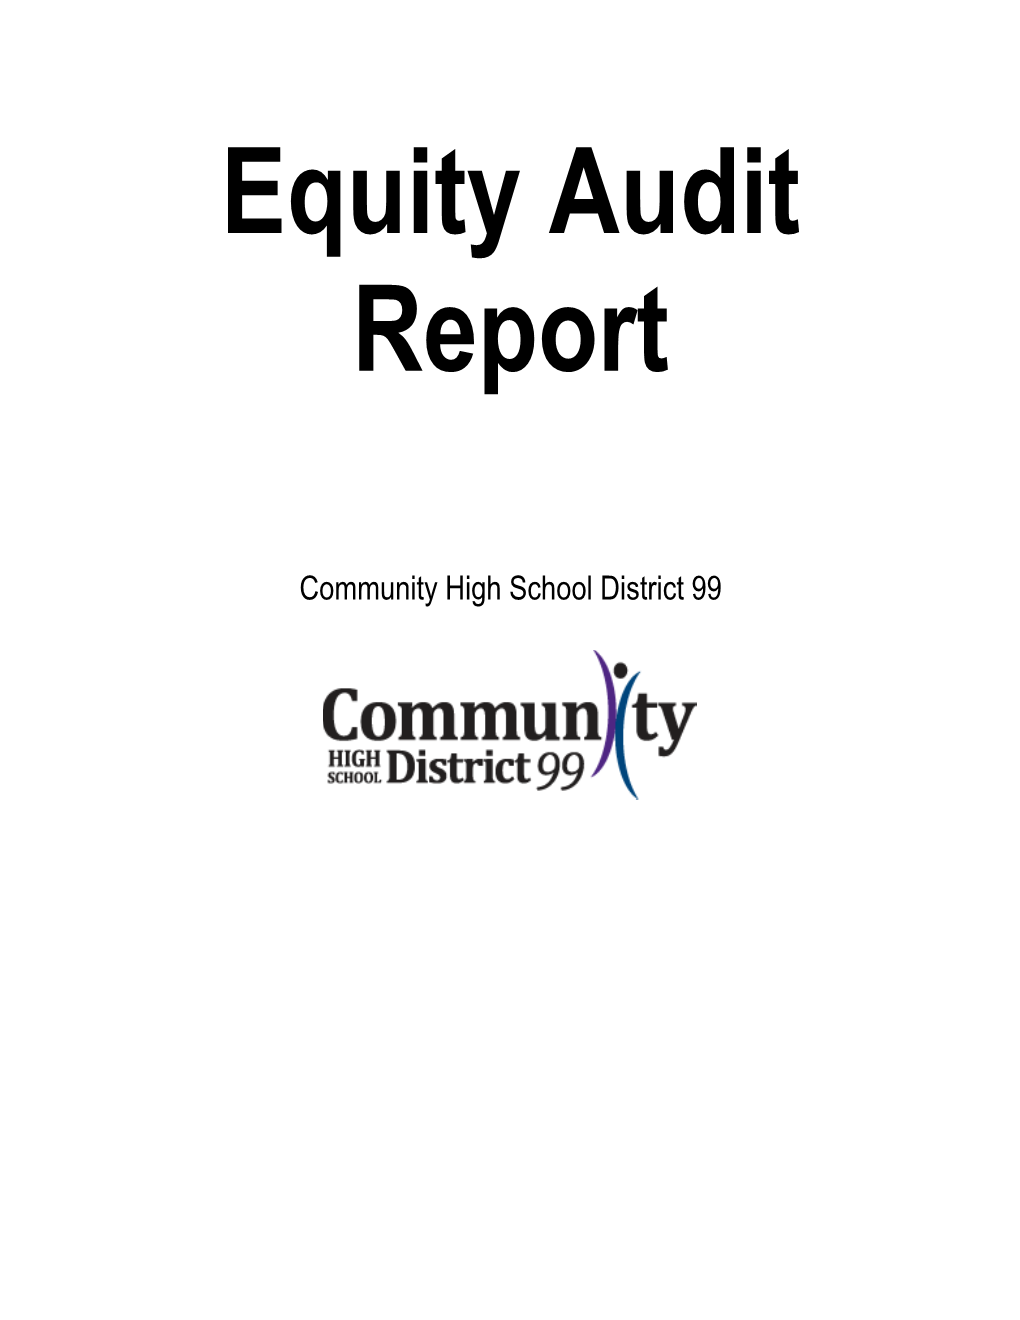 Equity Audit Report